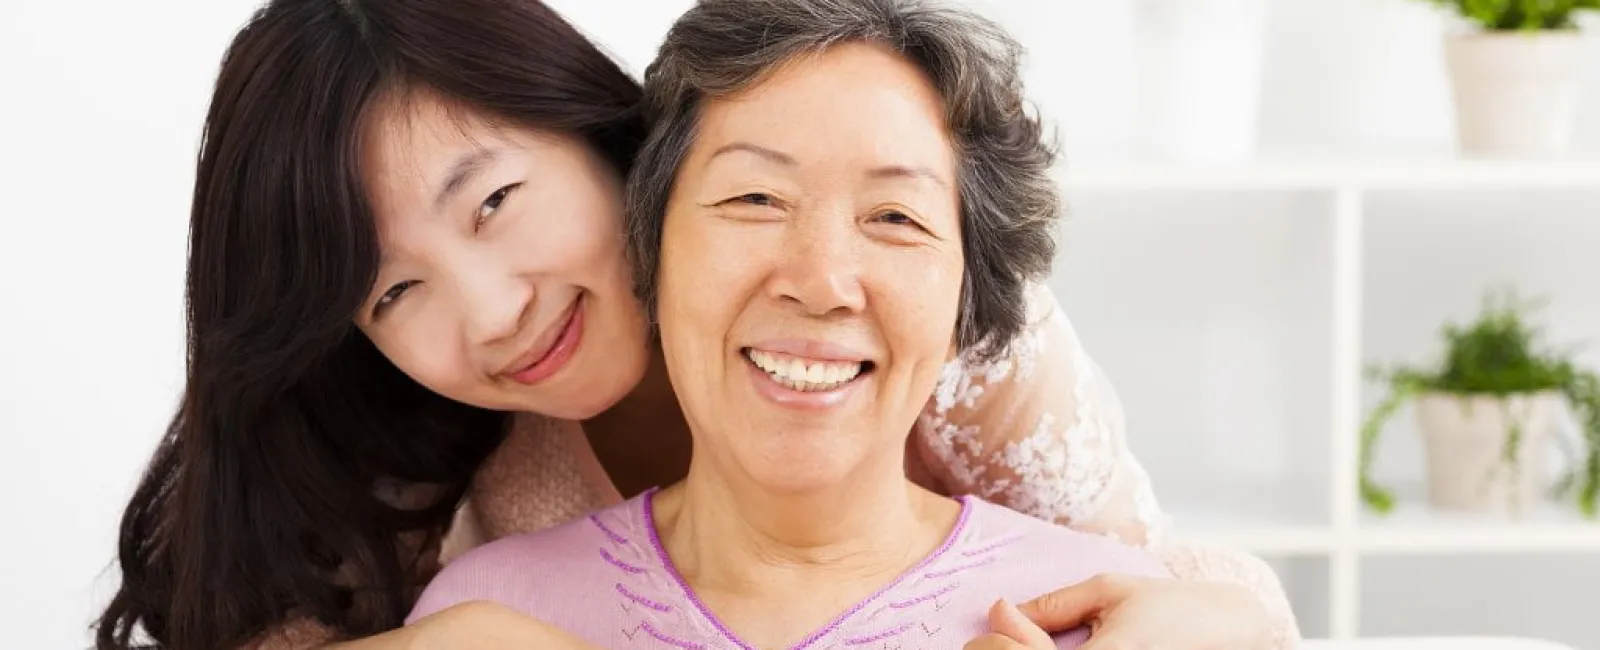 How to Be an Excellent Caregiver for Your Elderly Family Member